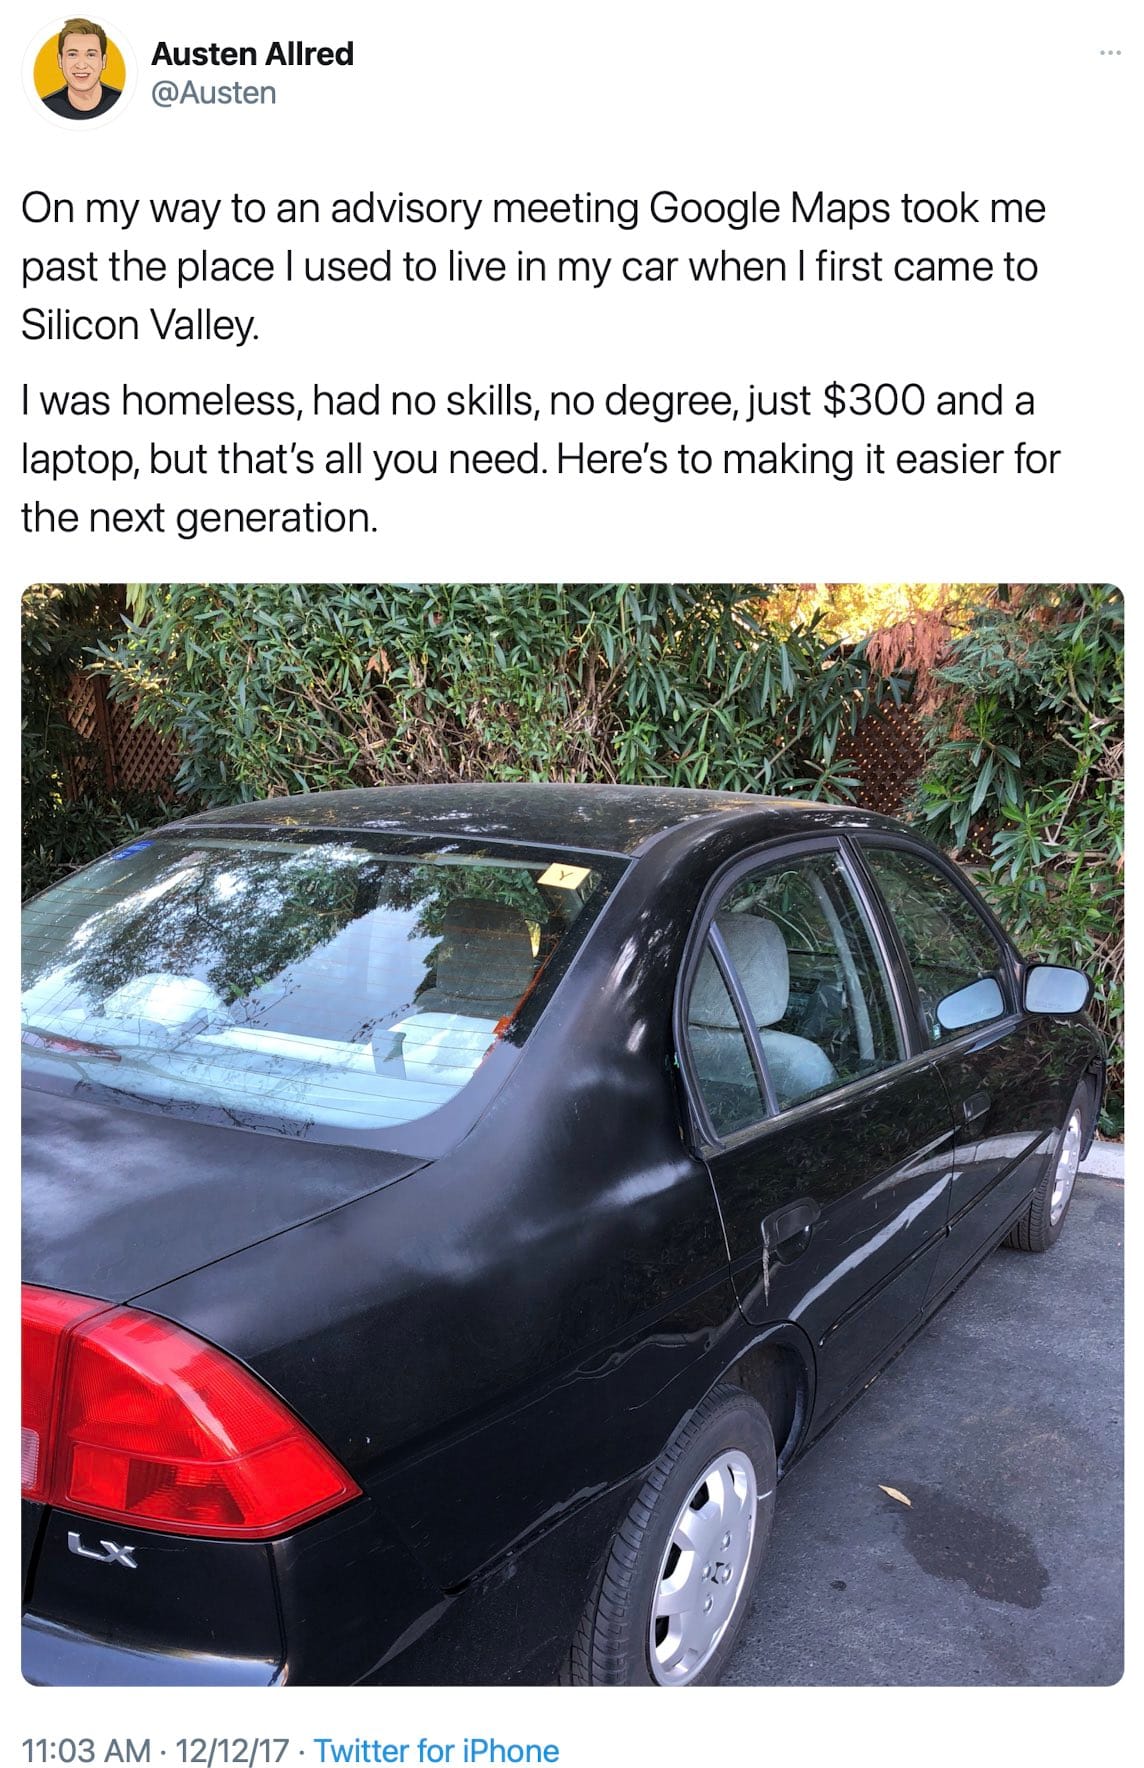 A tweet by Allred, alongside a photo of a car. "On my way to an advisory meeting Google Maps took me past the place I used to live in my car when I first came to Silicon Valley. I was homeless, had no skills, no degree, just $300 and a laptop, but that's all you need. Here's to making it easier for the next generation."